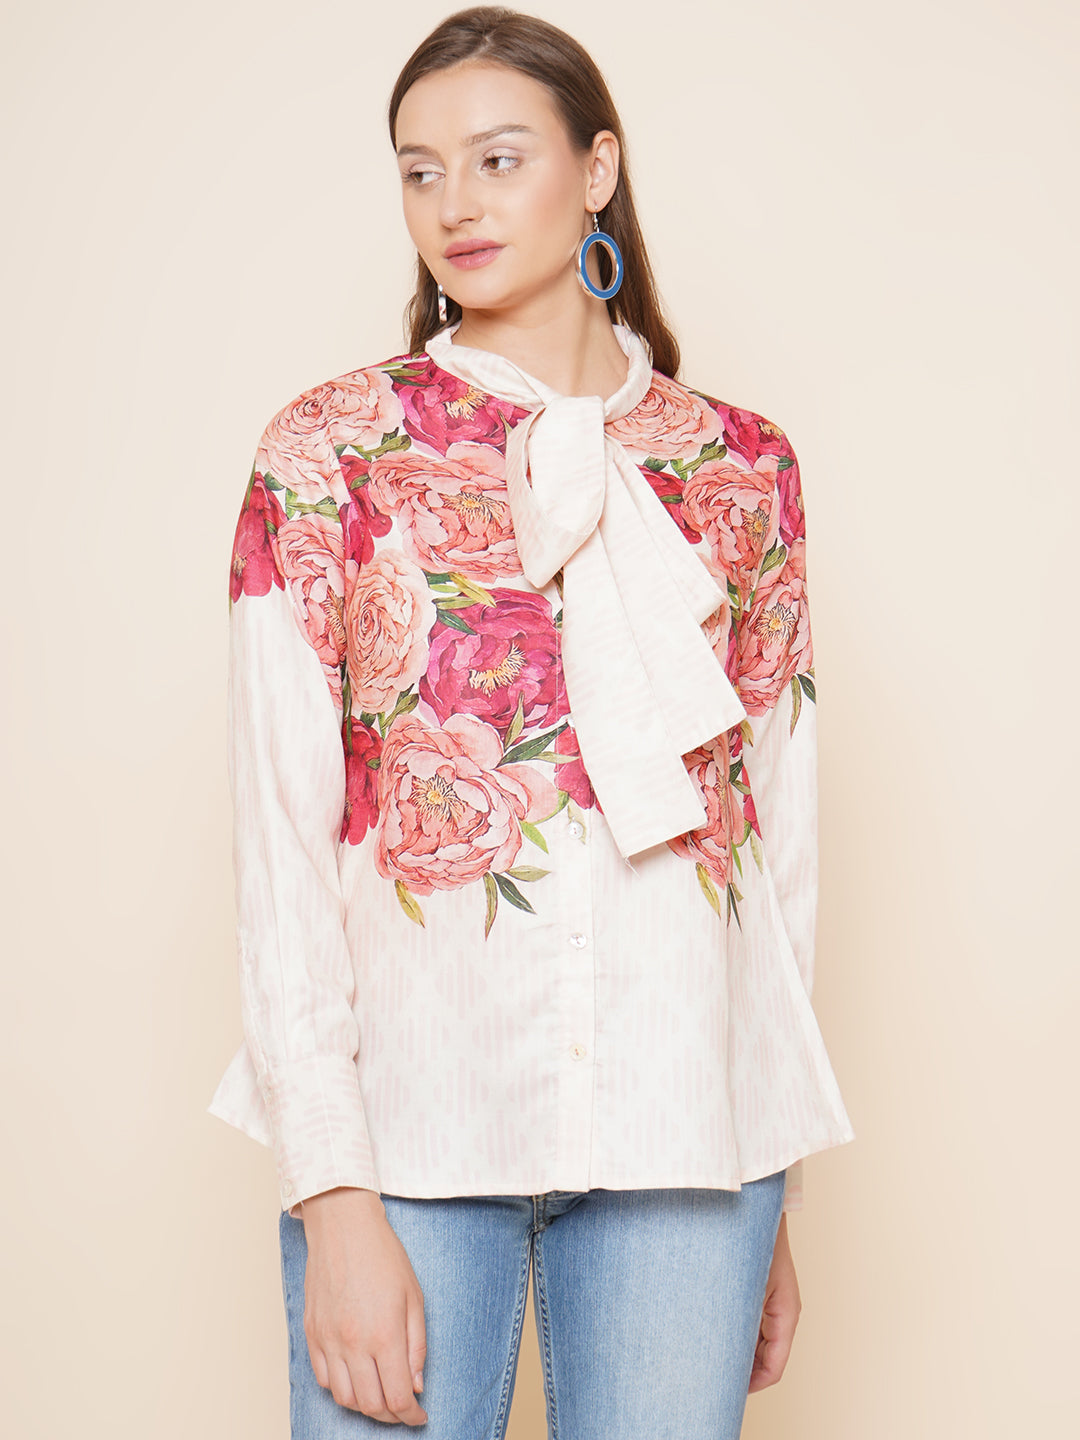 Bhama Couture Beige Floral Printed Shirt Style Top